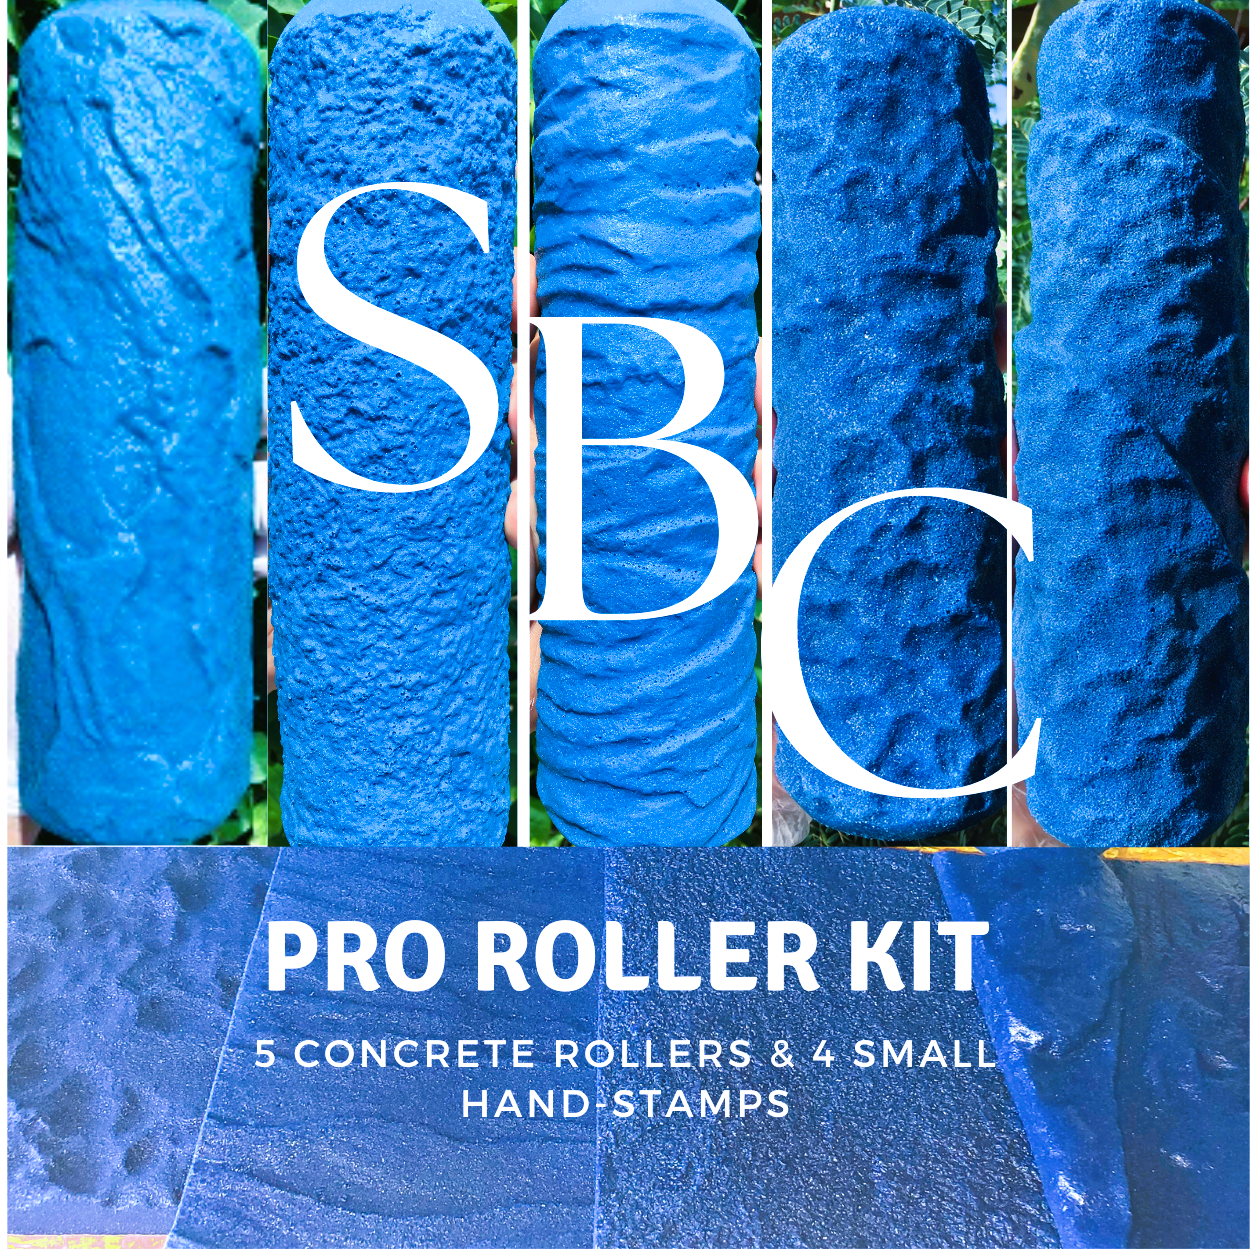 Concrete Texture Rollers-Best masonry texture roller Pro Kit-5 Rollers, 4 Stamps-Use For Forming Concrete Into Realistic Stone Textures